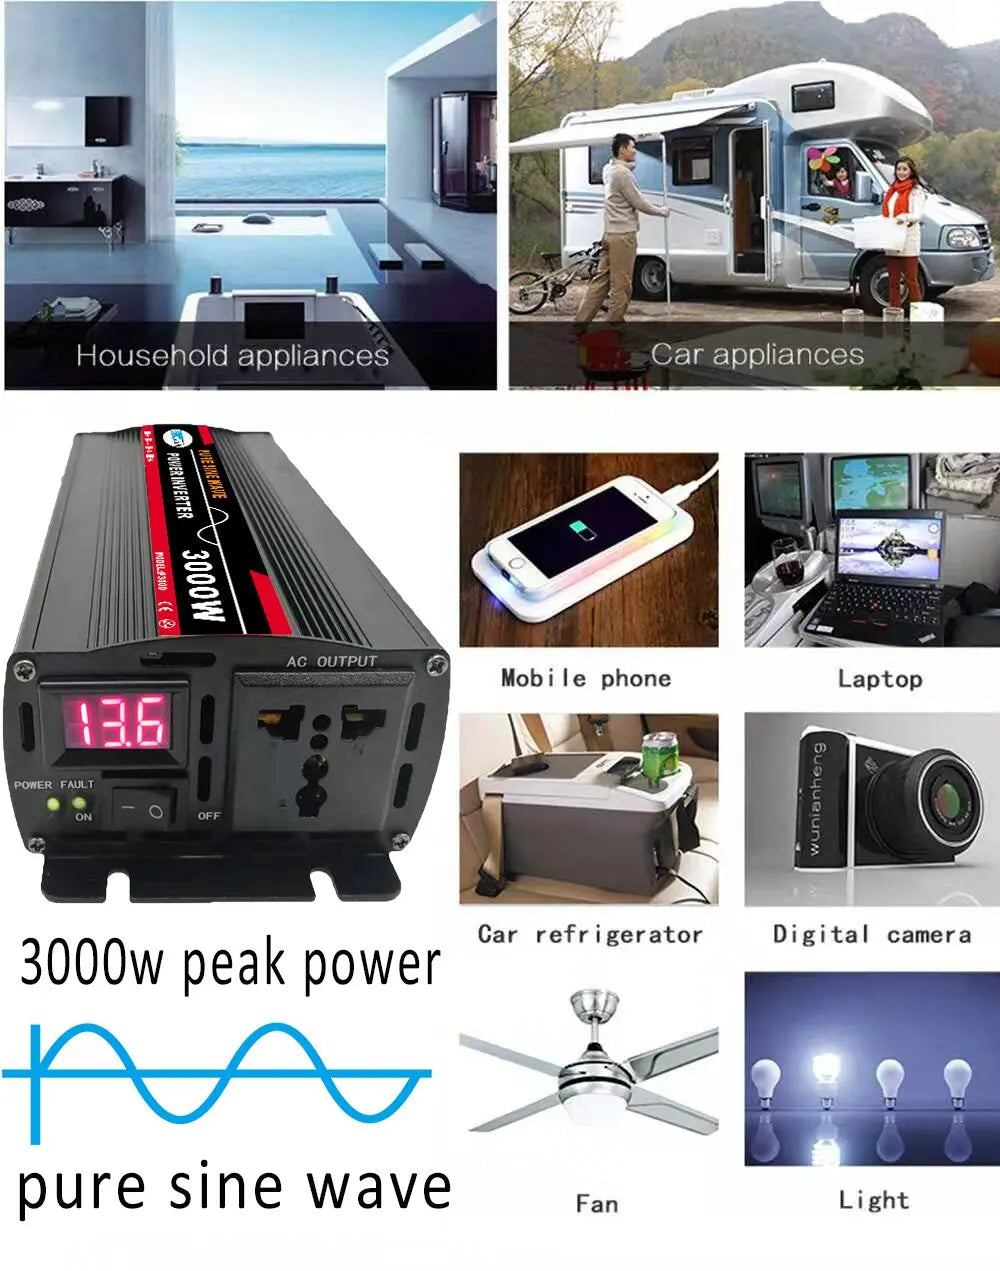 3000W/4000W/6000W Pure Sine Wave inverter, Convert DC power to pure sine wave AC for various devices and appliances.